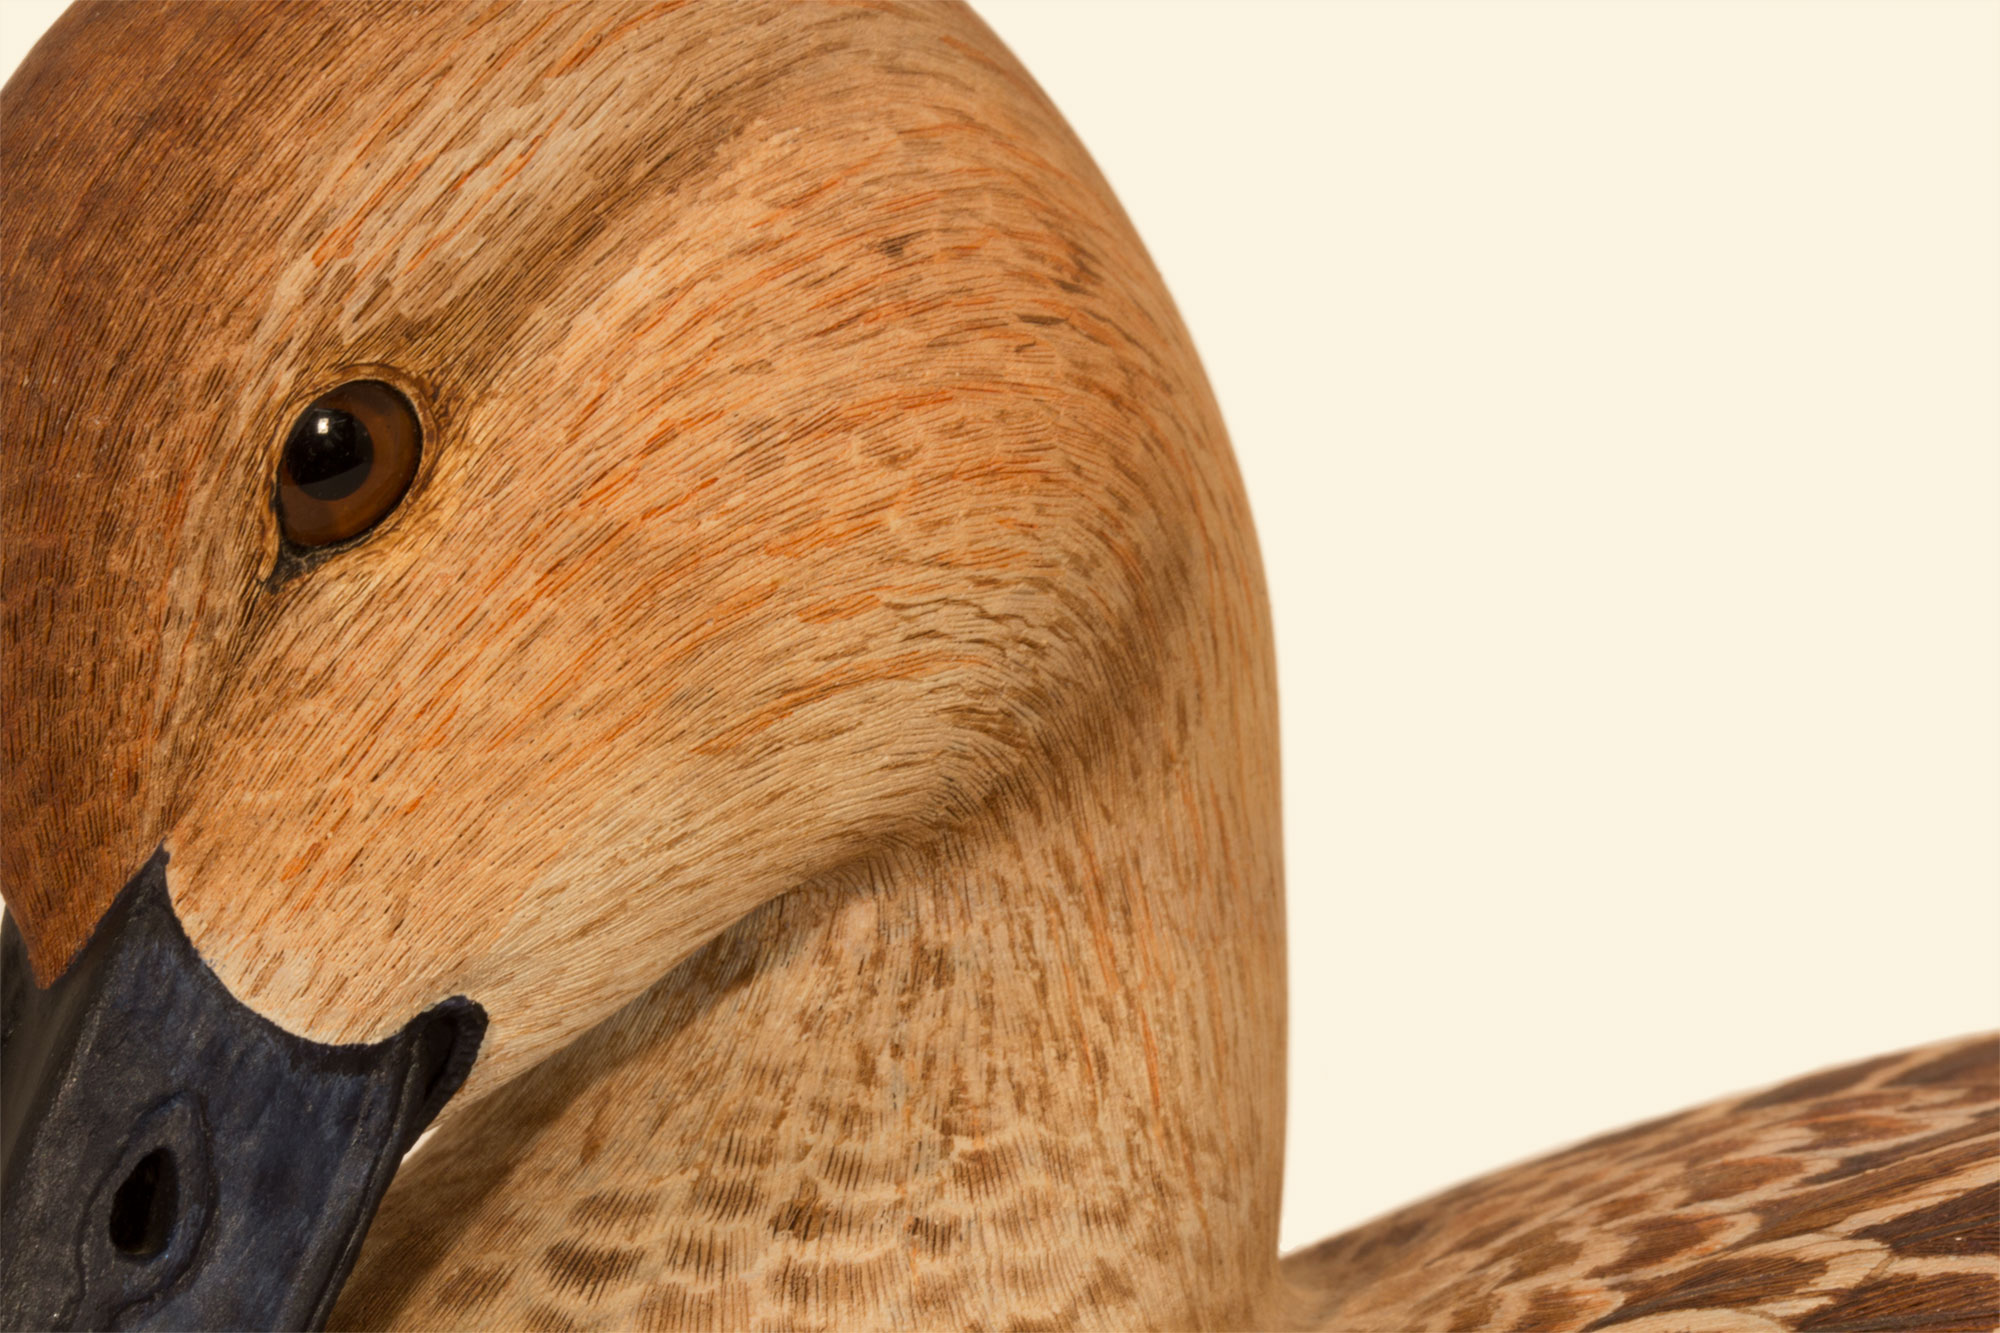 Pintail Hen 75% head detail bird wood carving by Feathercarver David Patrick-Brown